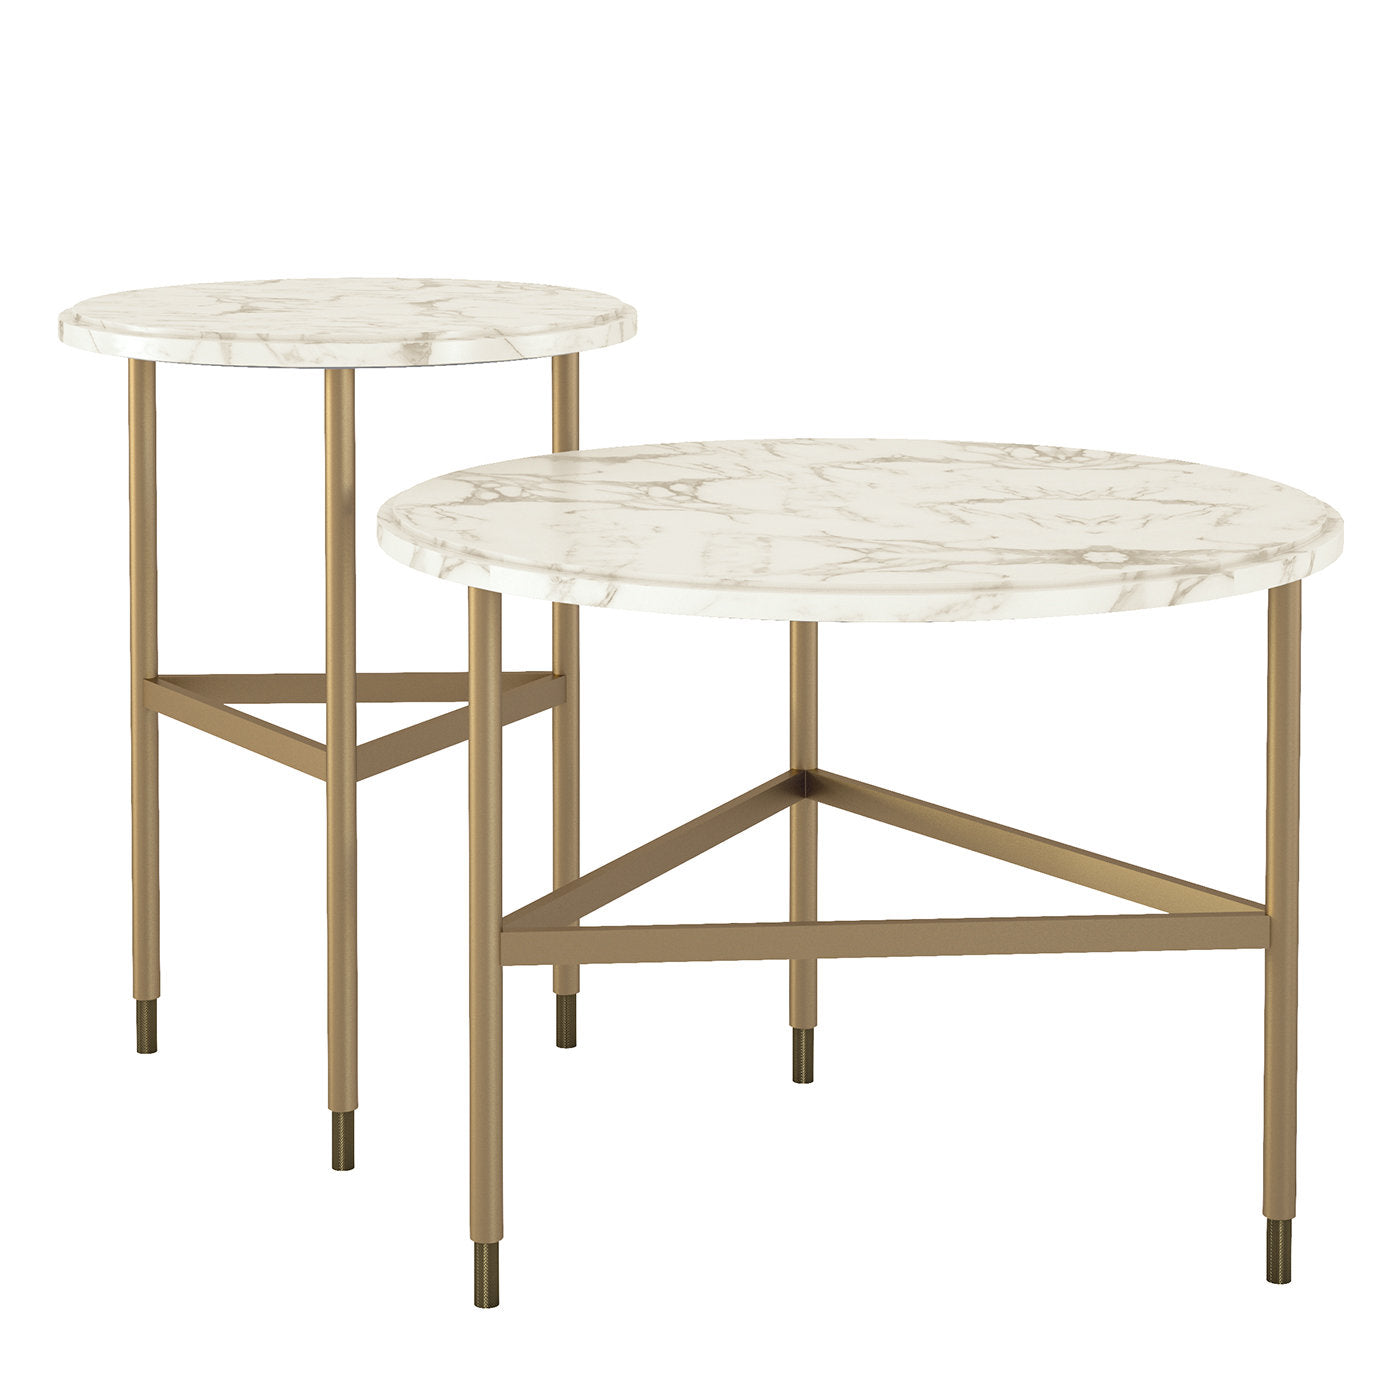 Set of 2 Gaudì Side Tables - Main view